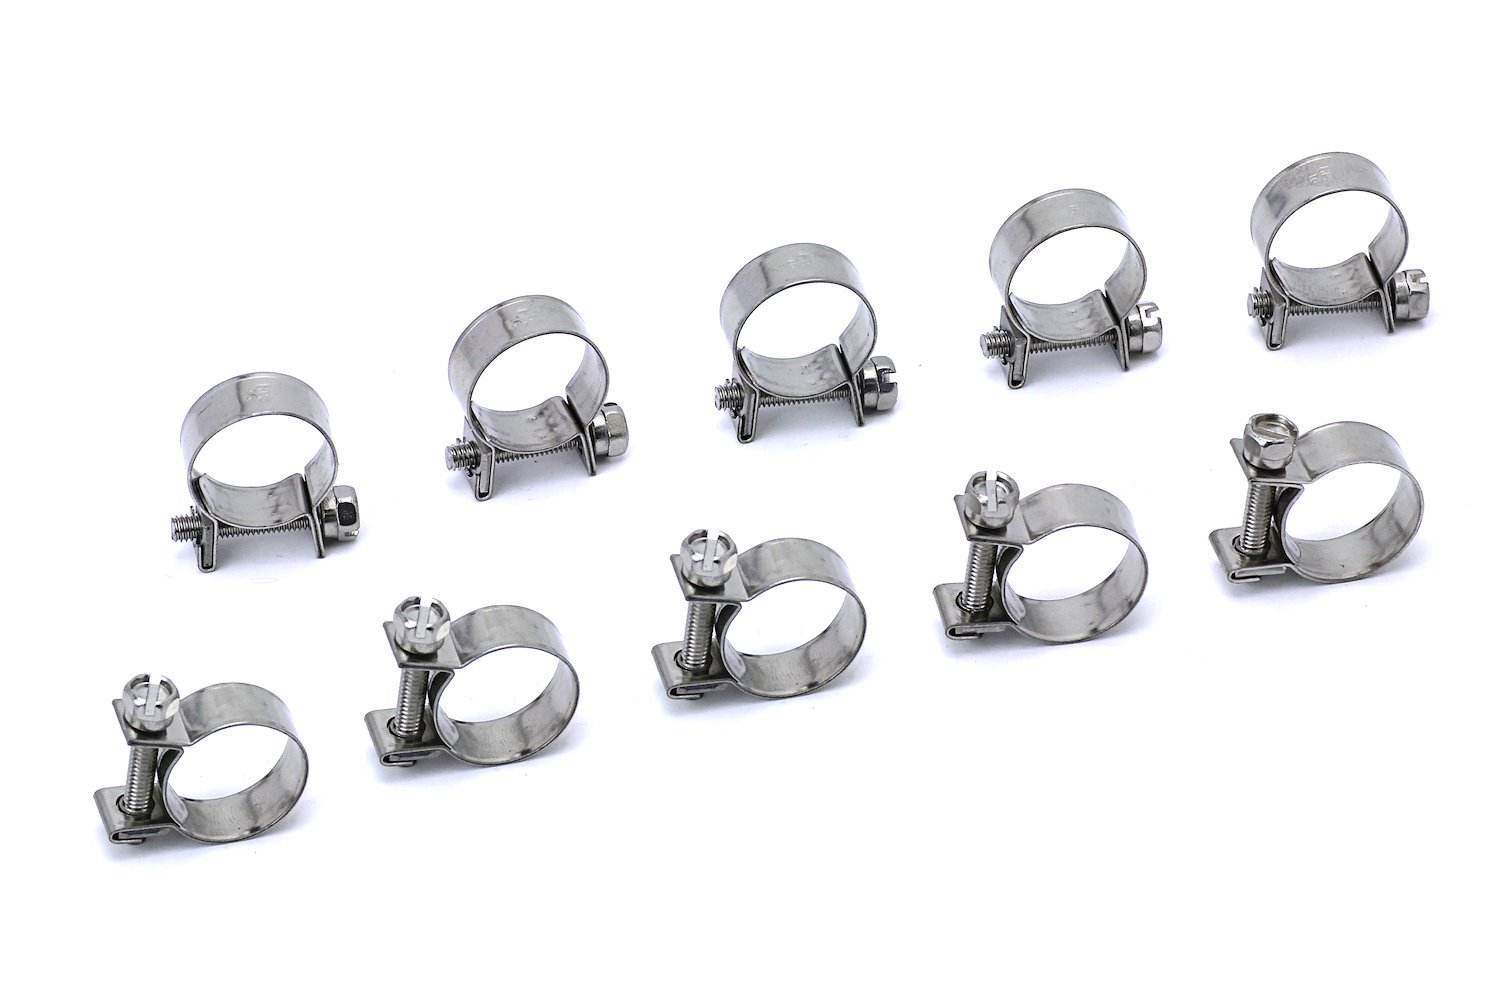 FIC-16x10 Fuel Injection Hose Clamp, 10 Stainless Steel Small Hose Clamps, 5/8 in. - 45/64 in. (16 mm-18 mm)